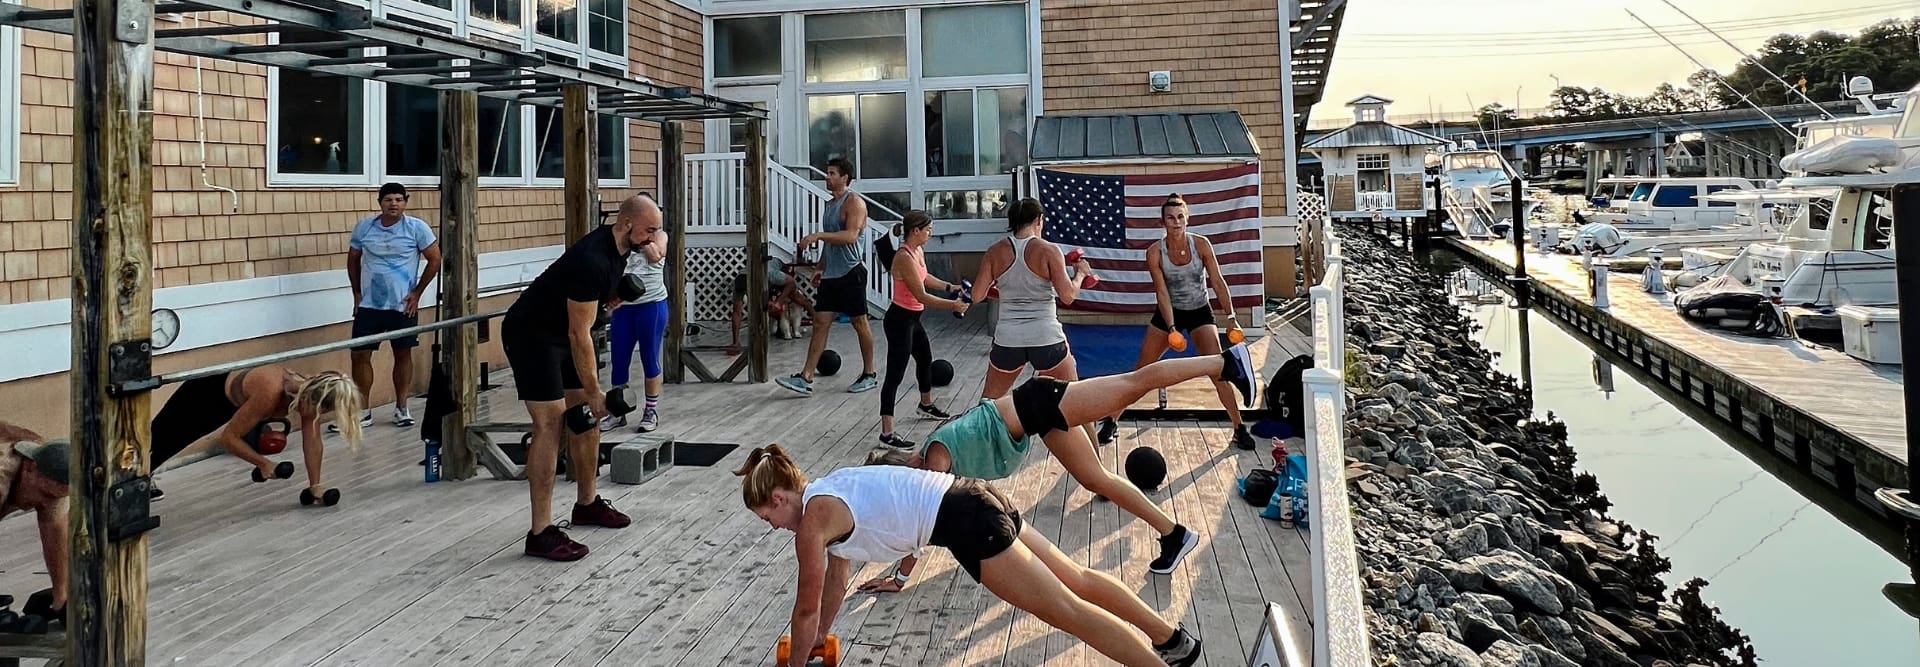 gym members use dumb bells during a group exercise class on the back deck at inlet fitness in virginia beach